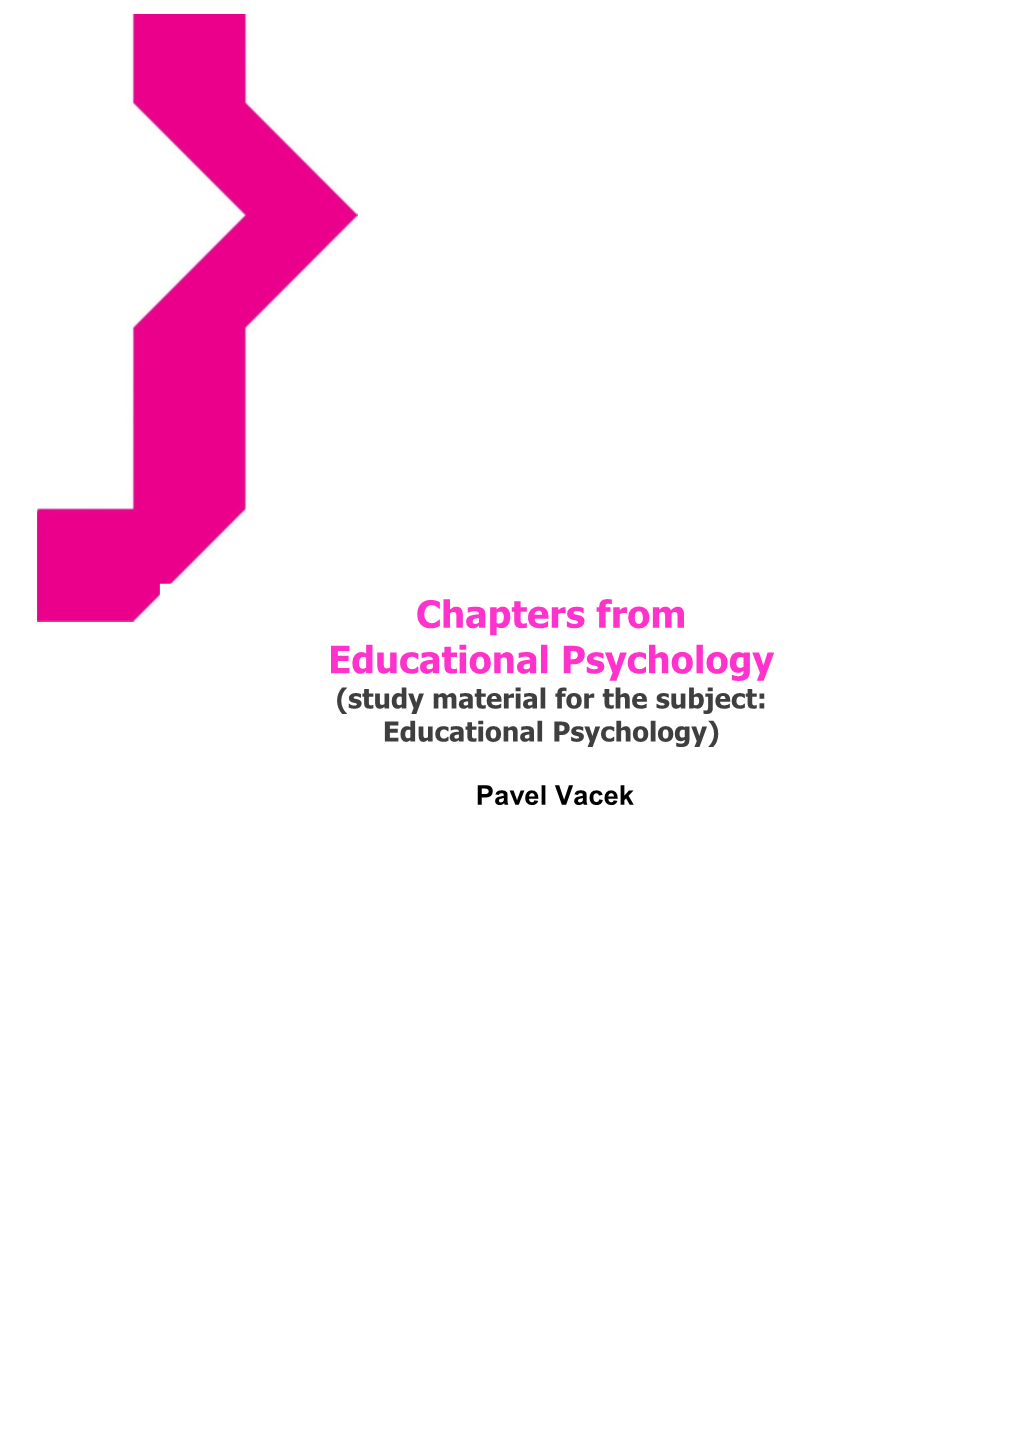 Chapters from Educational Psychology (Study Material for the Subject: Educational Psychology)